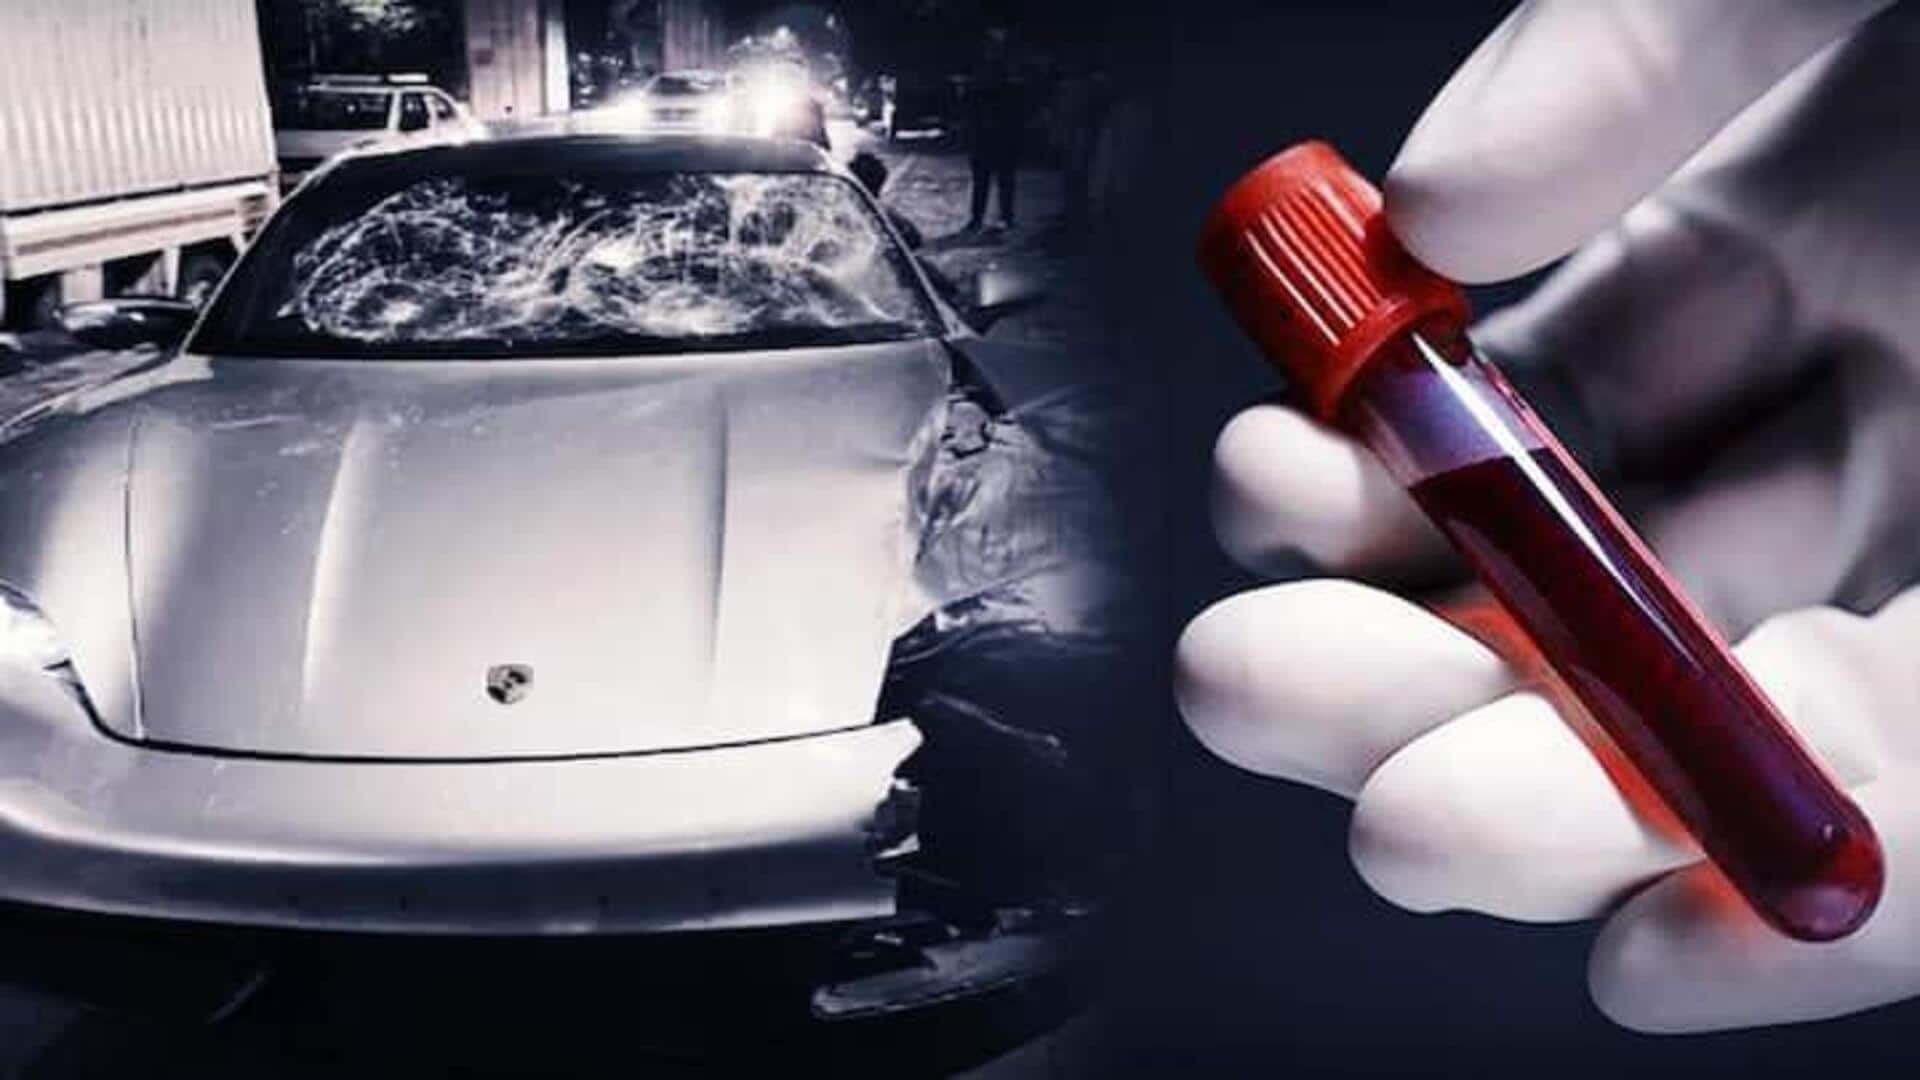 Pune Porsche crash: Doctor who 'changed' teen's blood sample sacked  